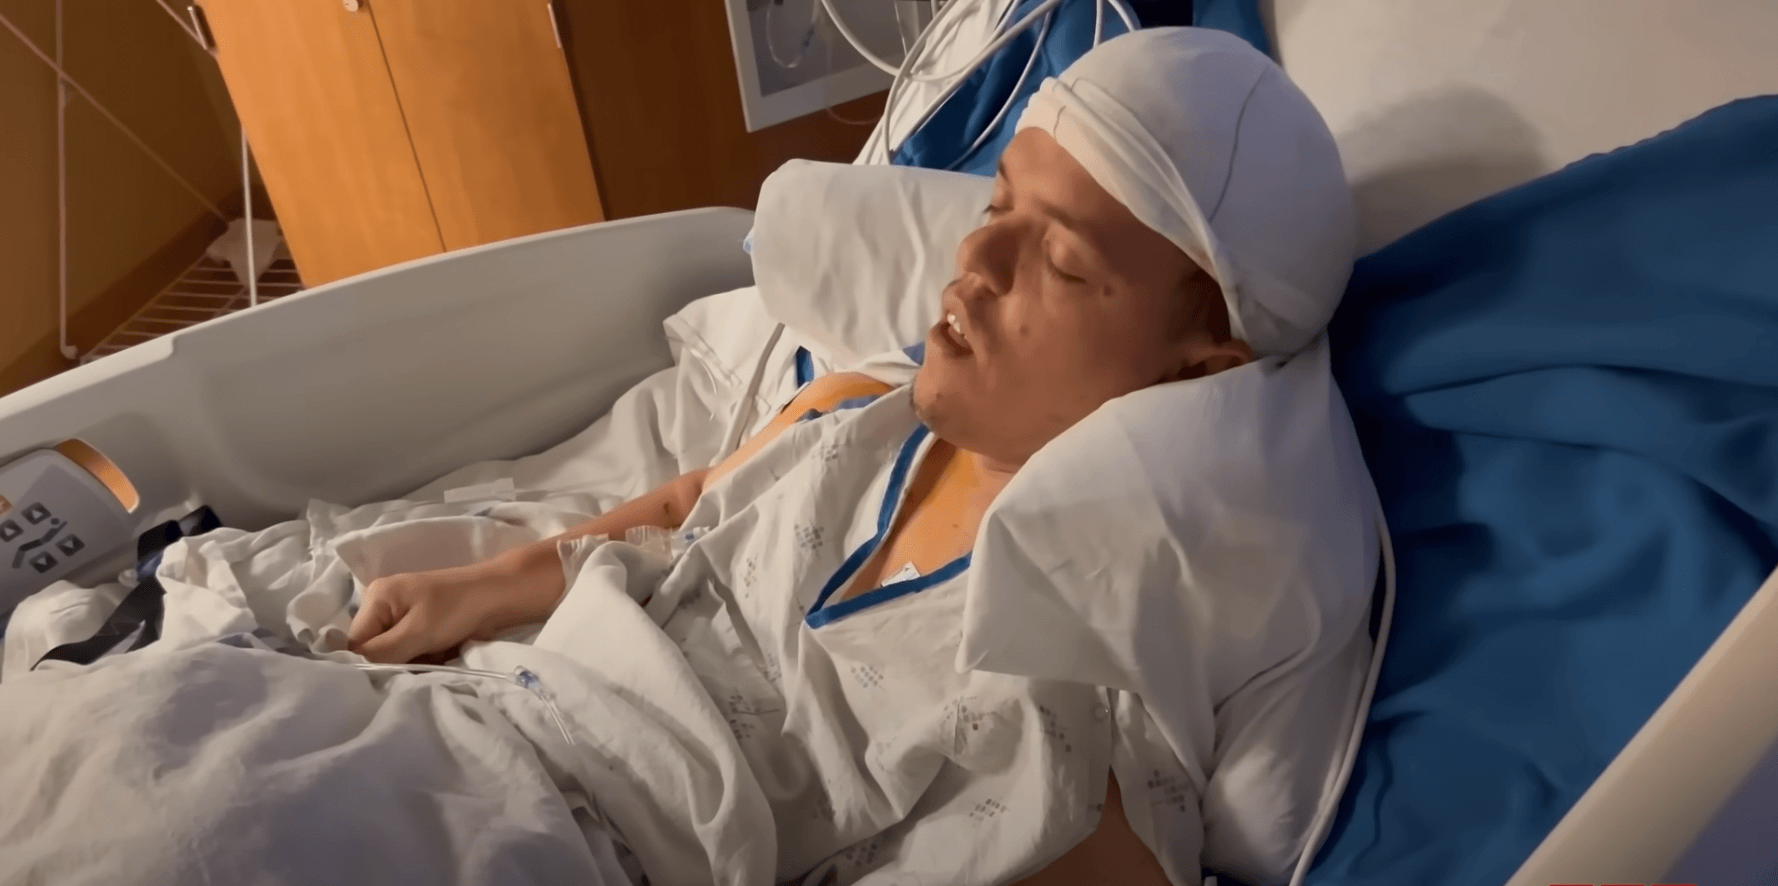 'Little People, Big World' star Zach Roloff lying in a hospital bed with a bandage around his head